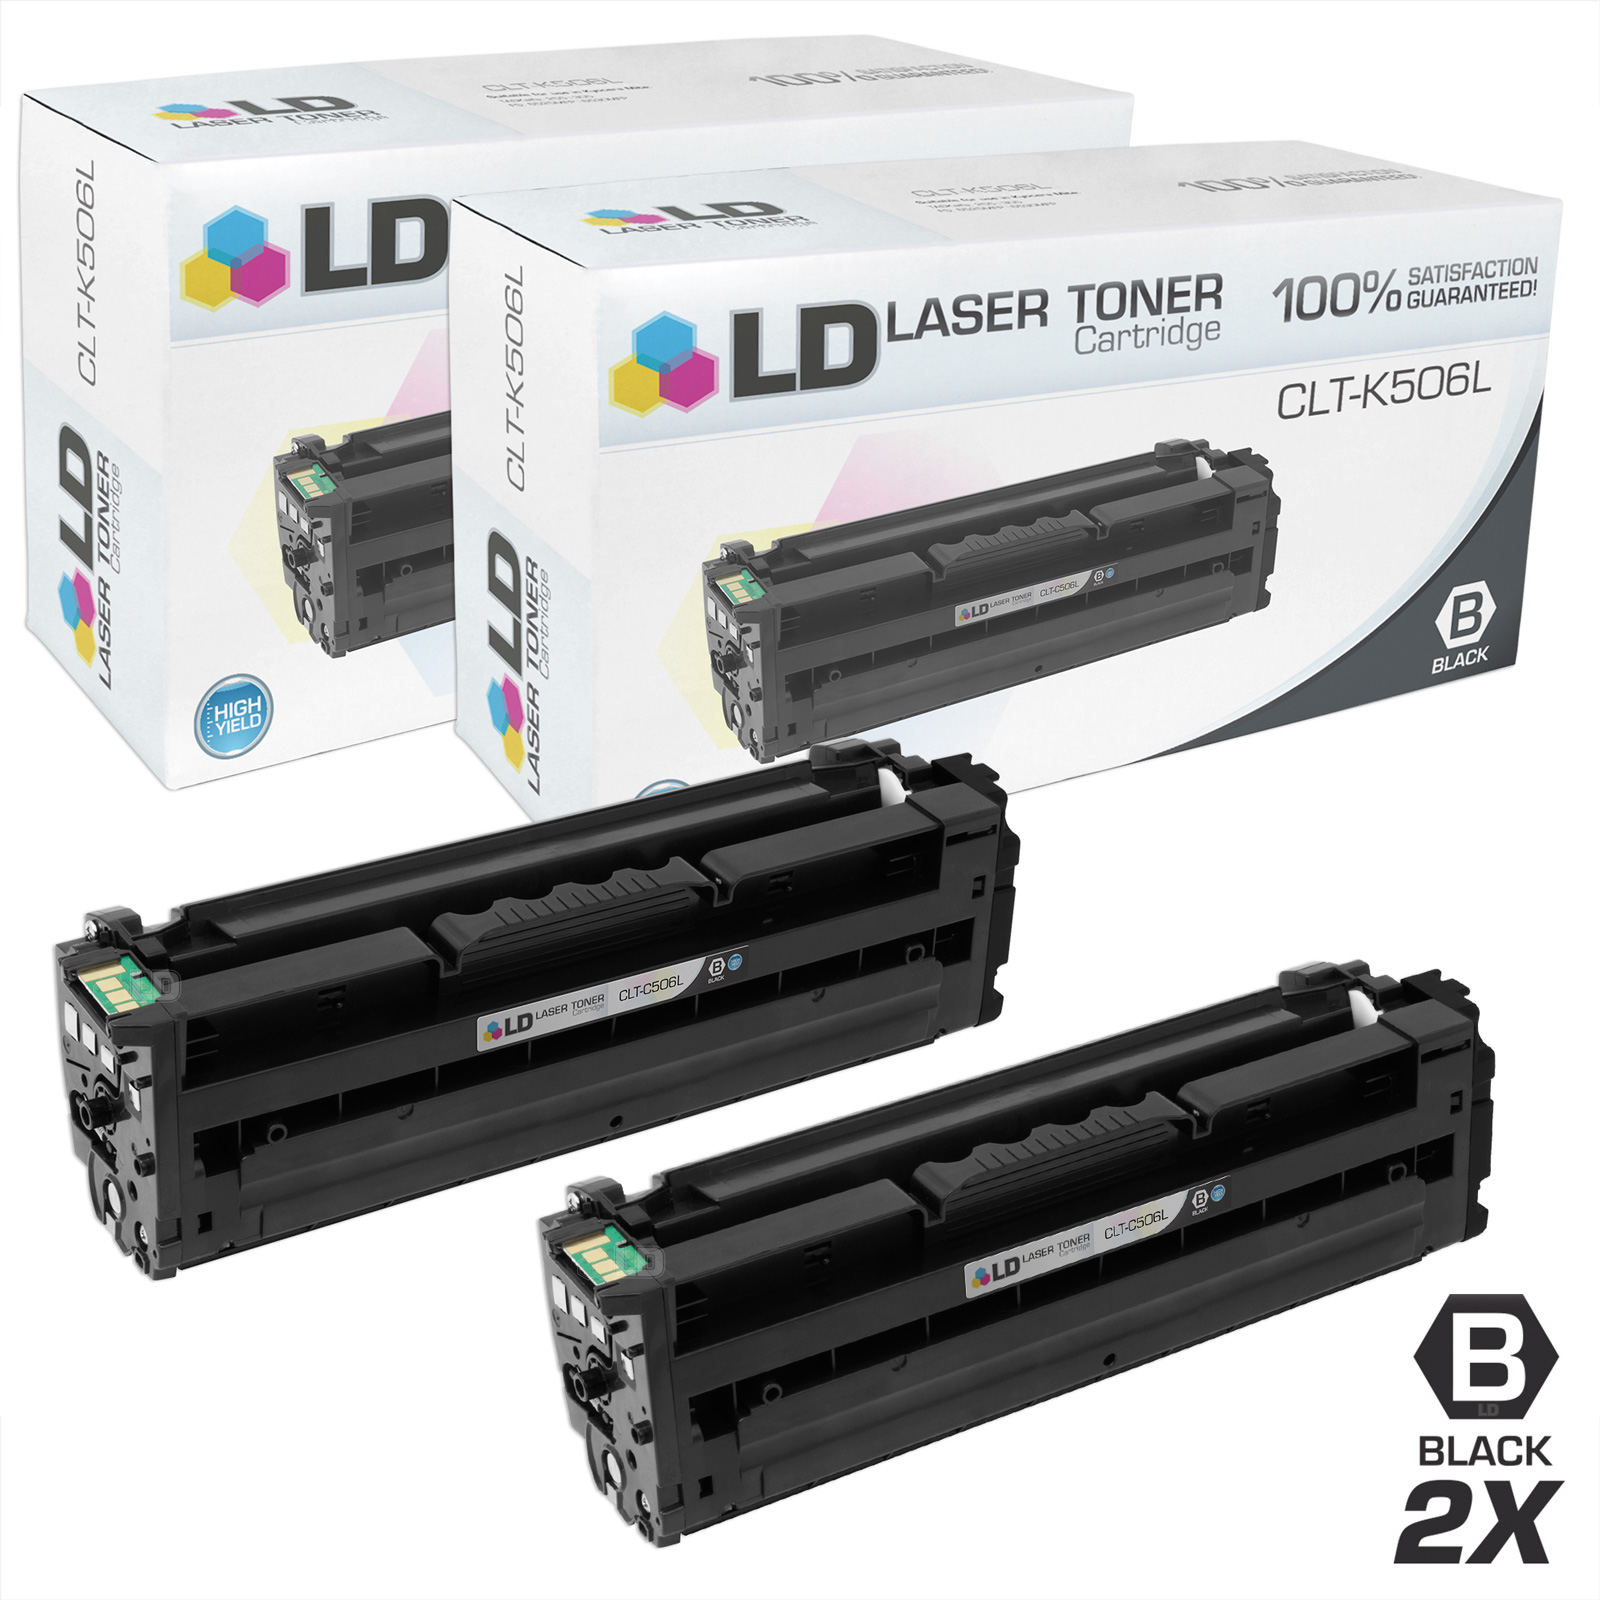 LD Products Compatible Toner Cartridge Replacement for Samsung K506 CLT-K506L High Yie (Black, 2-Pack) - image 1 of 6